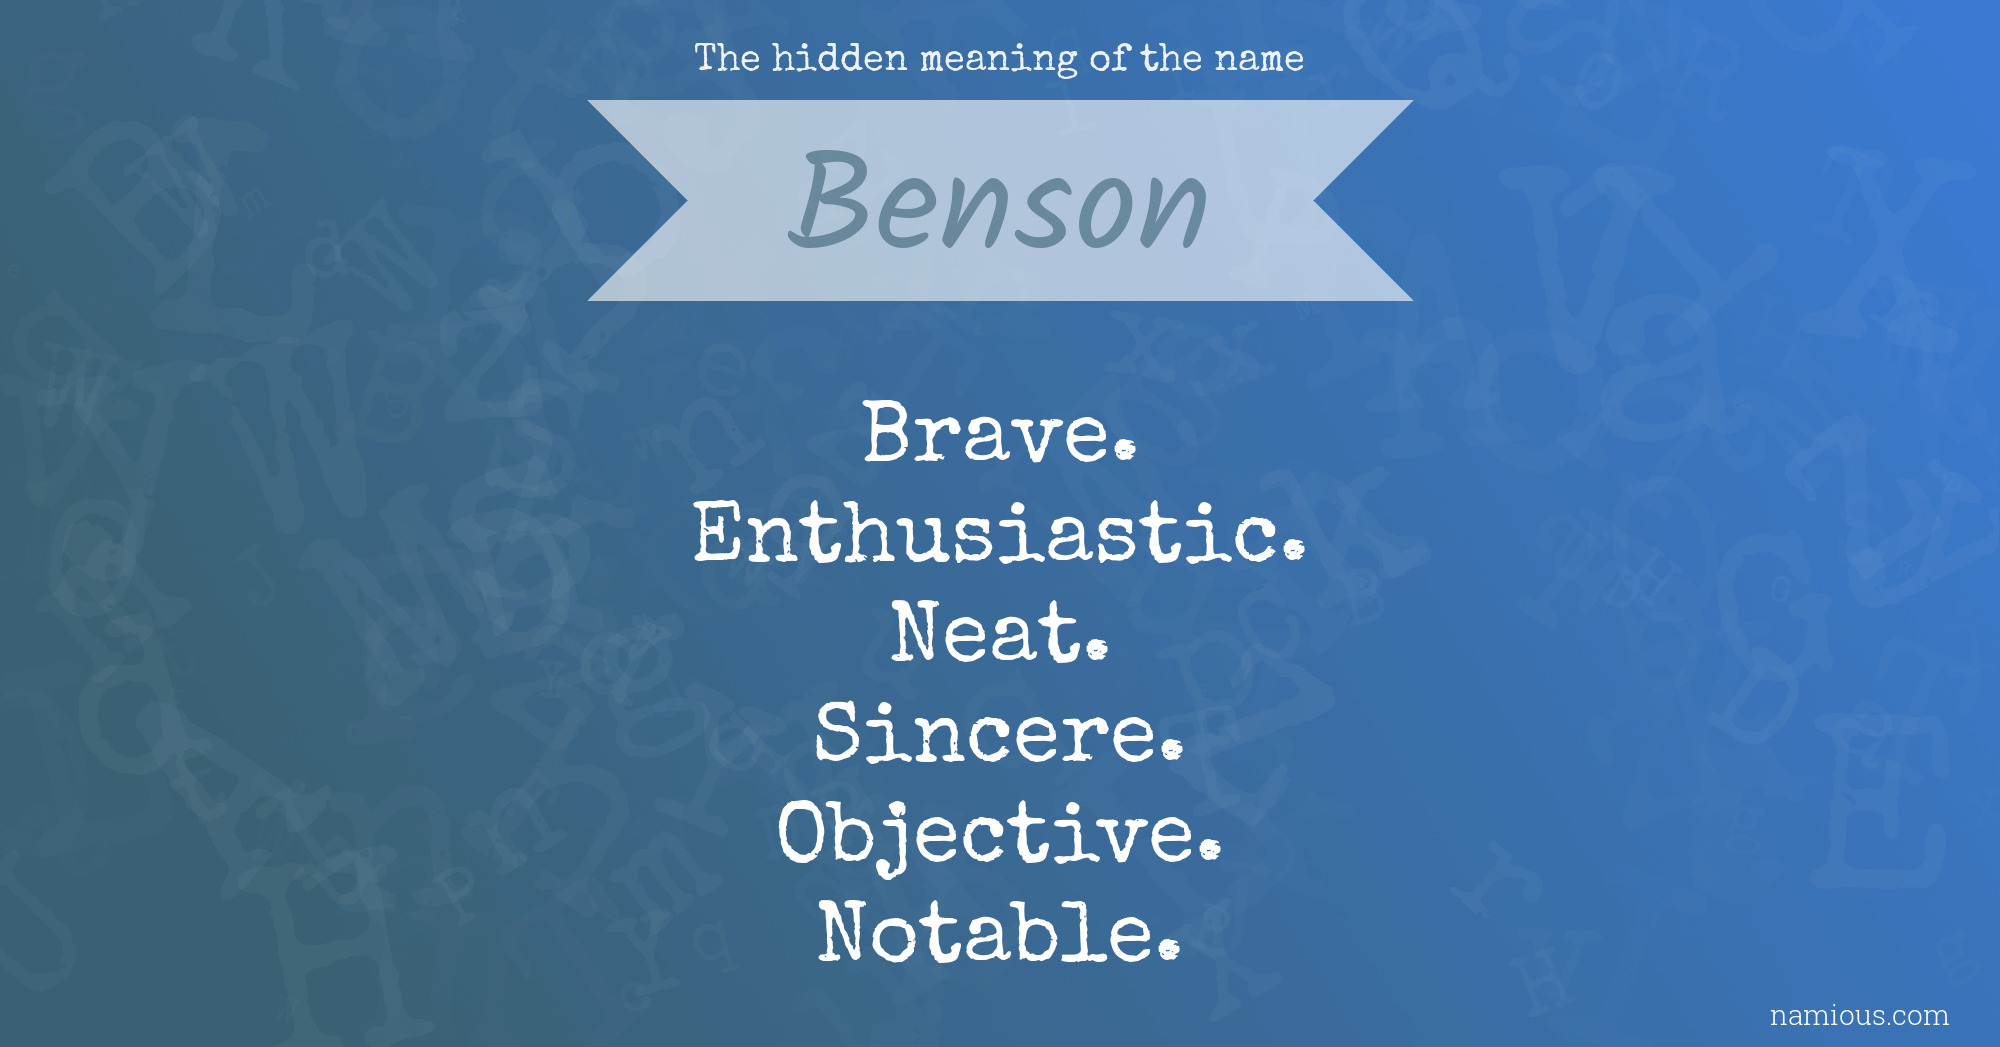 The hidden meaning of the name Benson